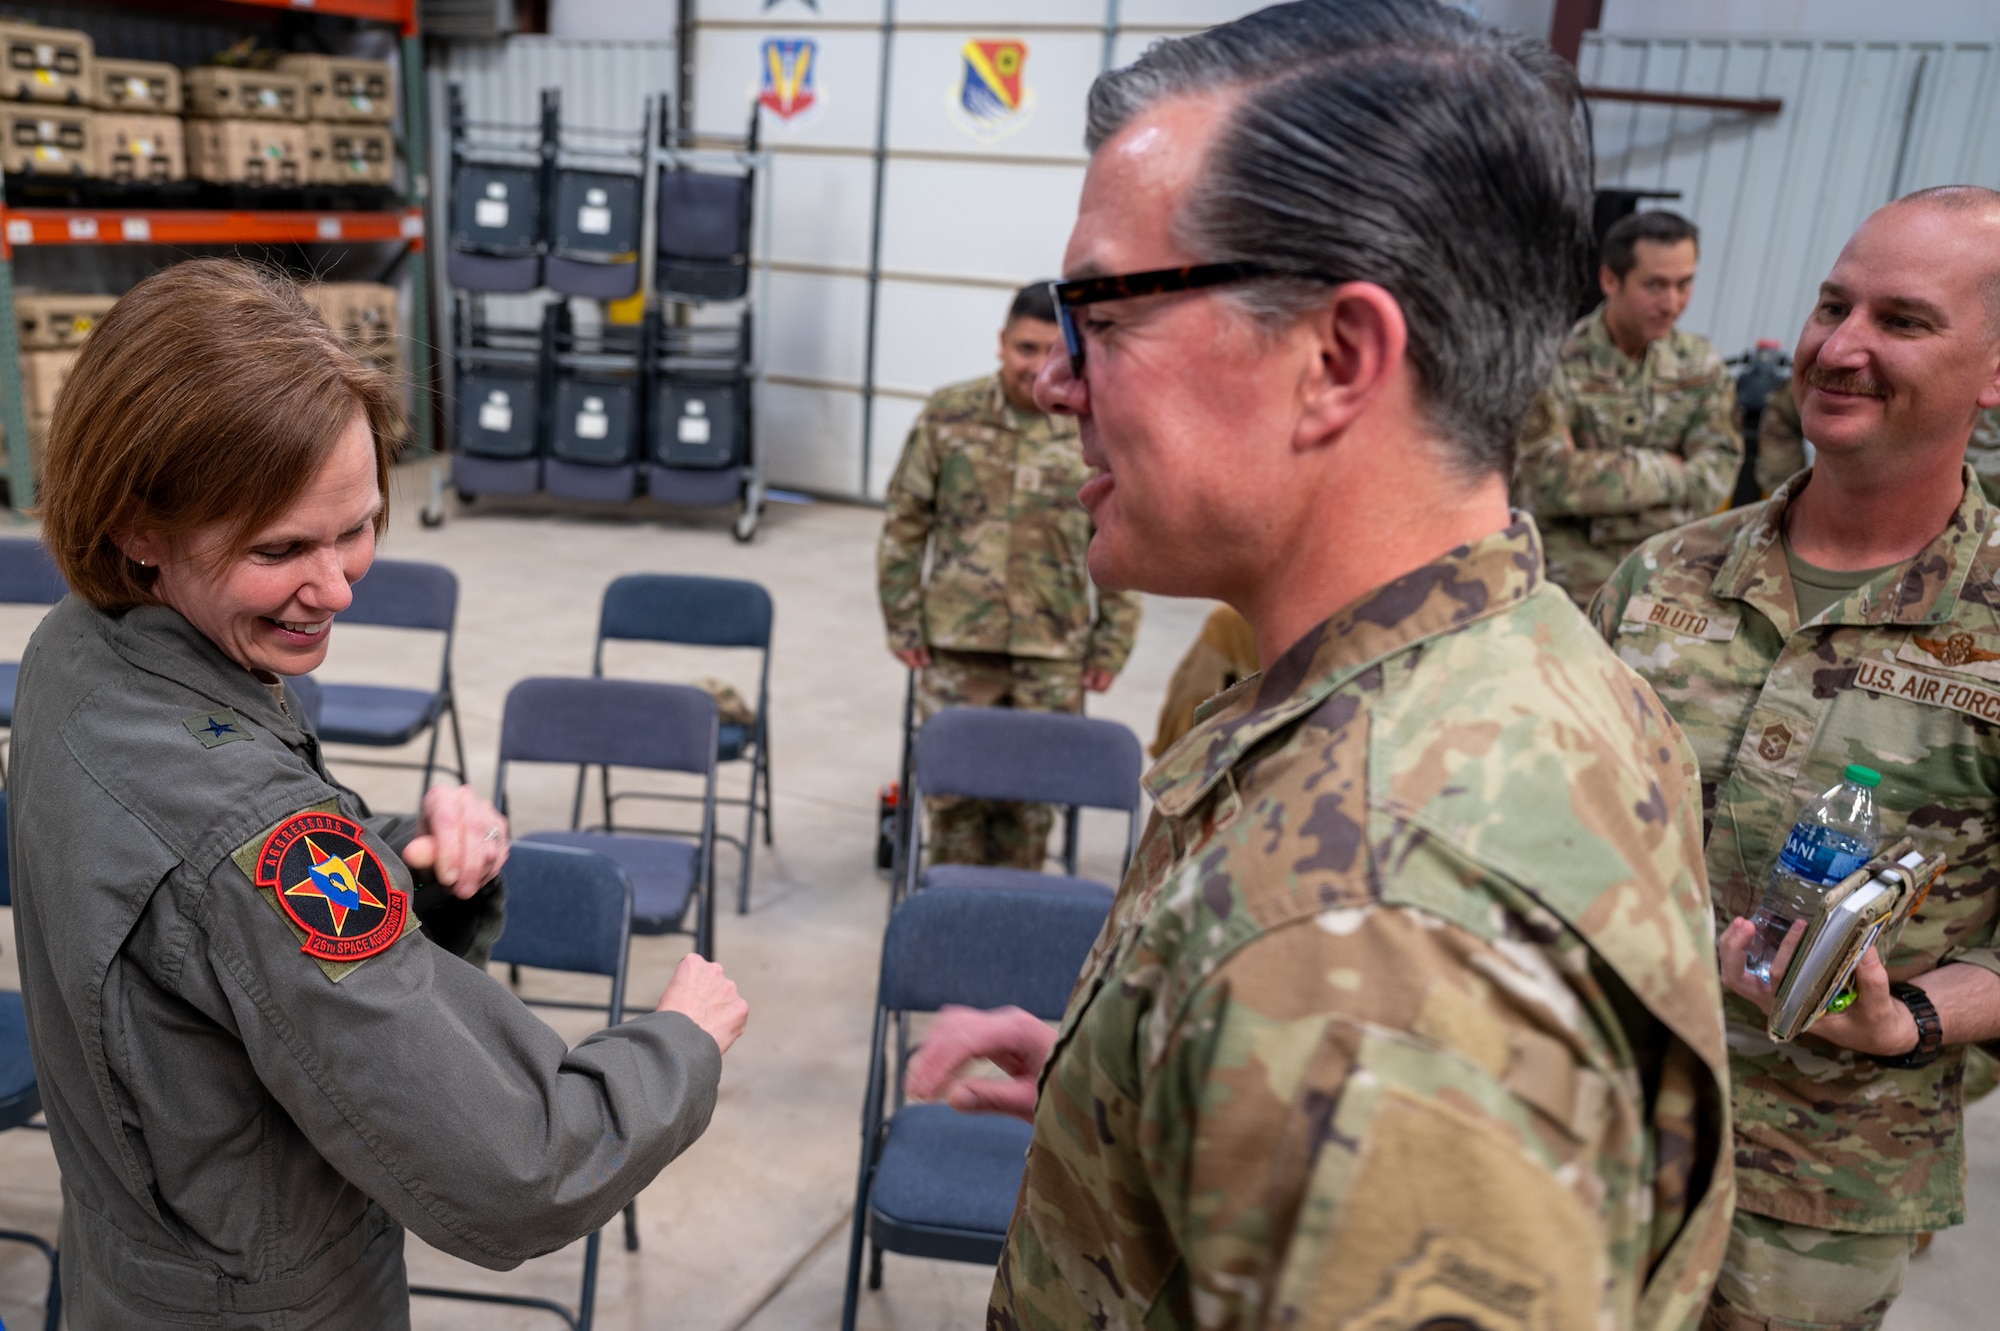 A woman wearing a U.S. Air Force military uniform looks at a military patch on her arm while others look on.